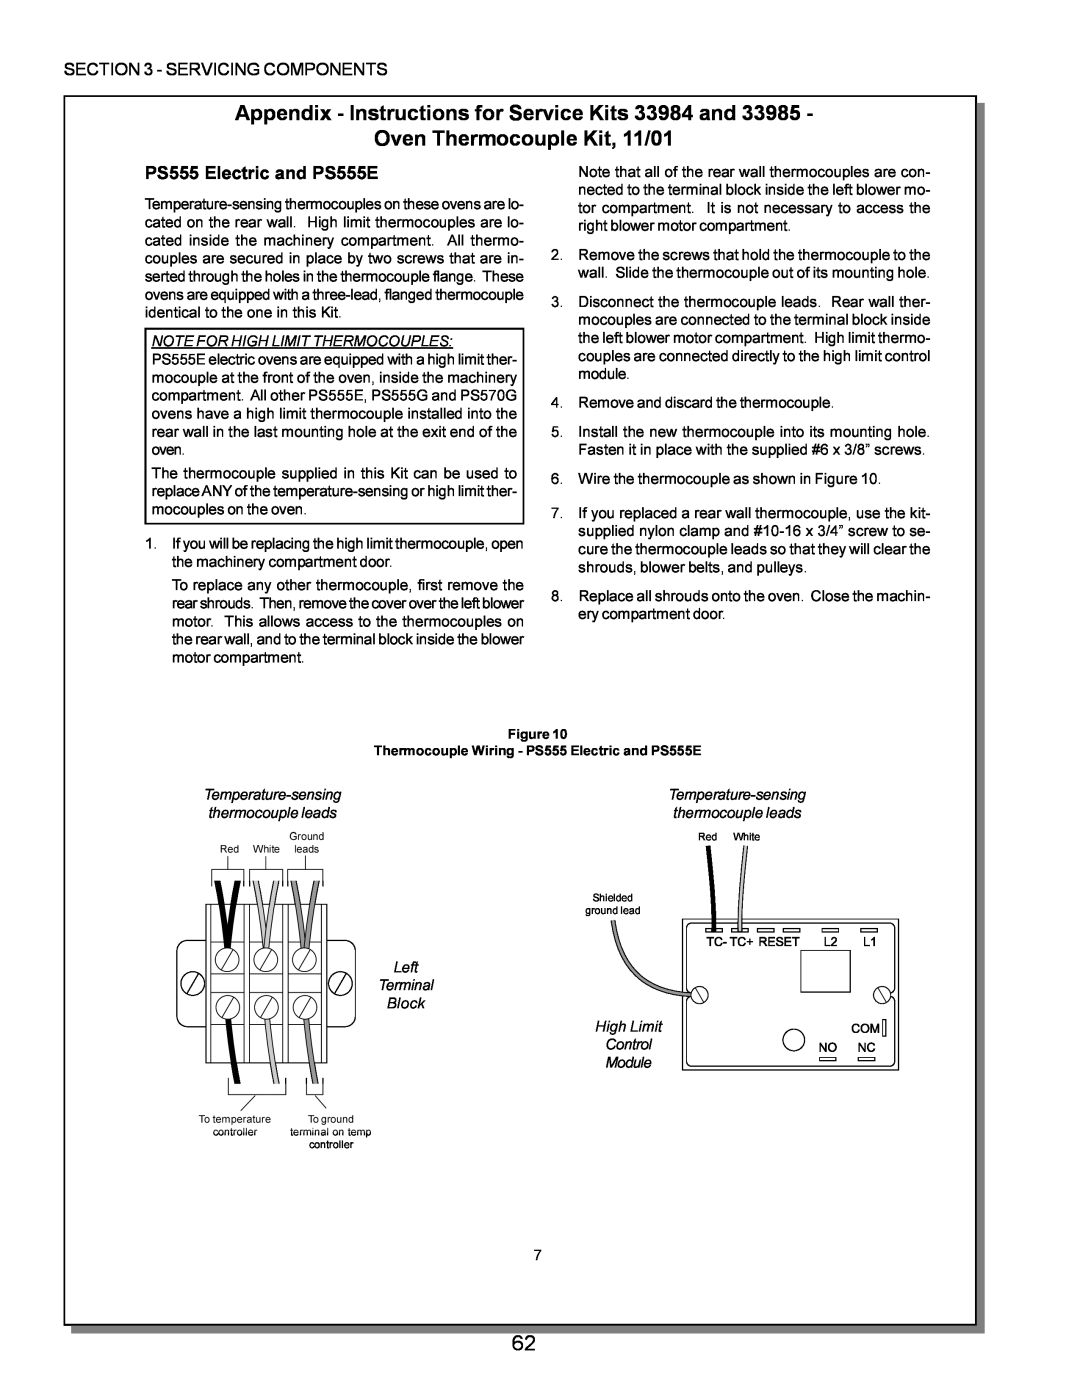 Middleby Marshall PS555, PS570, PS360 manual Appendix - Instructions for Service Kits 33984 and, Oven Thermocouple Kit, 11/01 